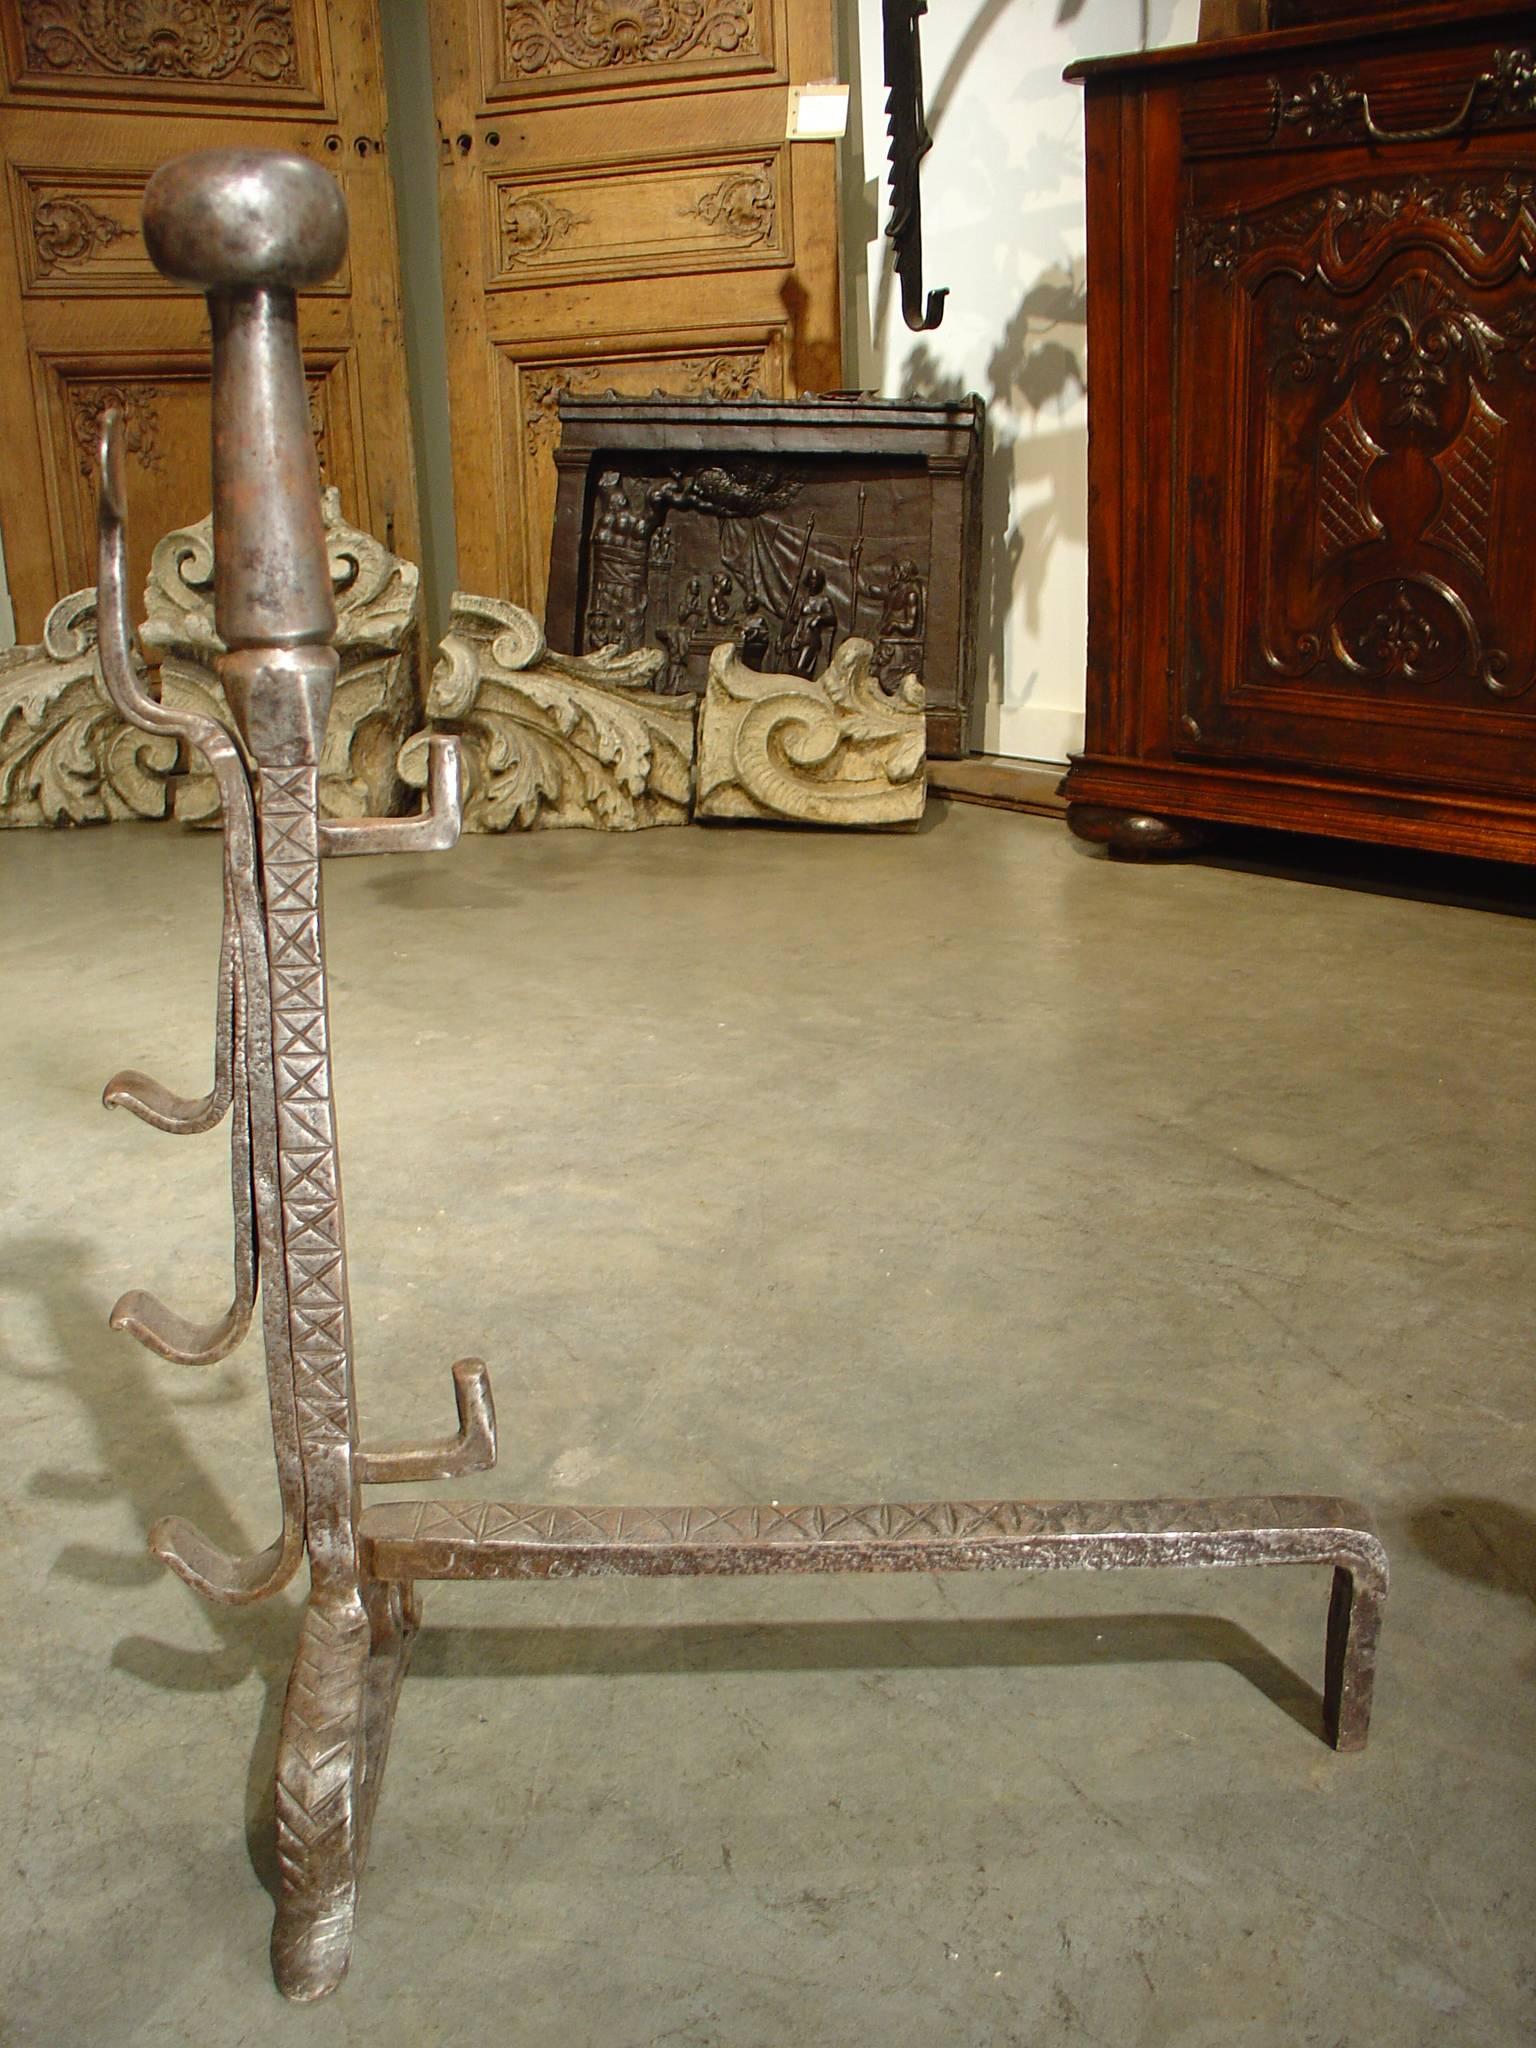 These antique French hand wrought andirons date to the 1500’s. With their age, they have become beautifully worn.  They have levels of hooks for rods to be placed horizontally so the cooking pots could be hung at different heat levels.  The andirons